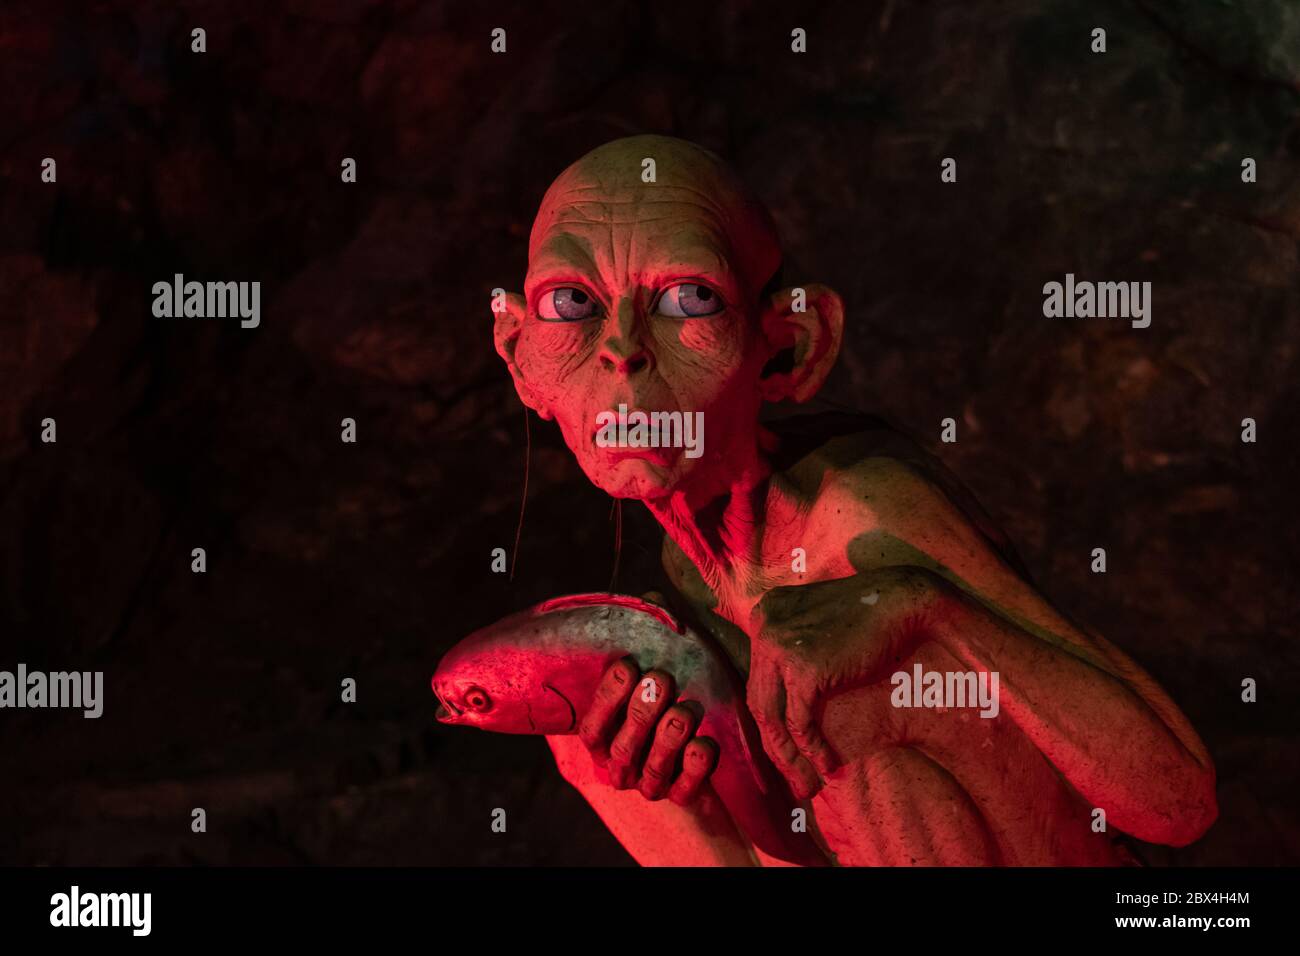 Gollum Stock Photos and Pictures - 1,007 Images